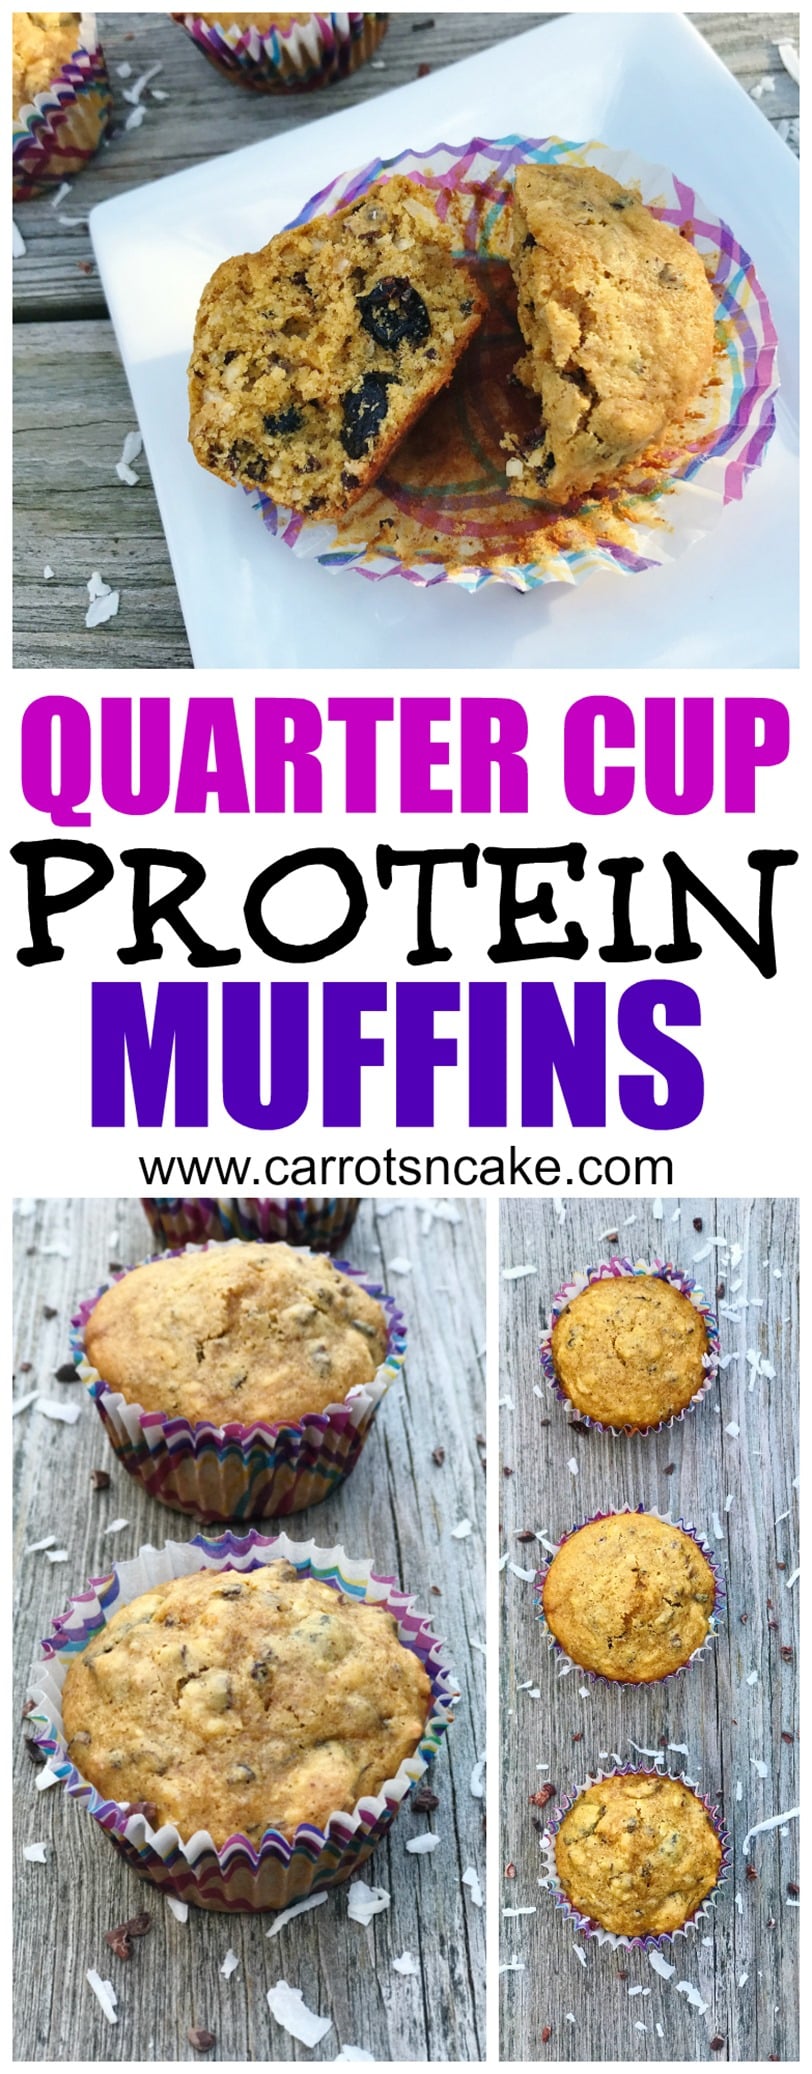 QUARTER CUP PROTEIN MUFFINS